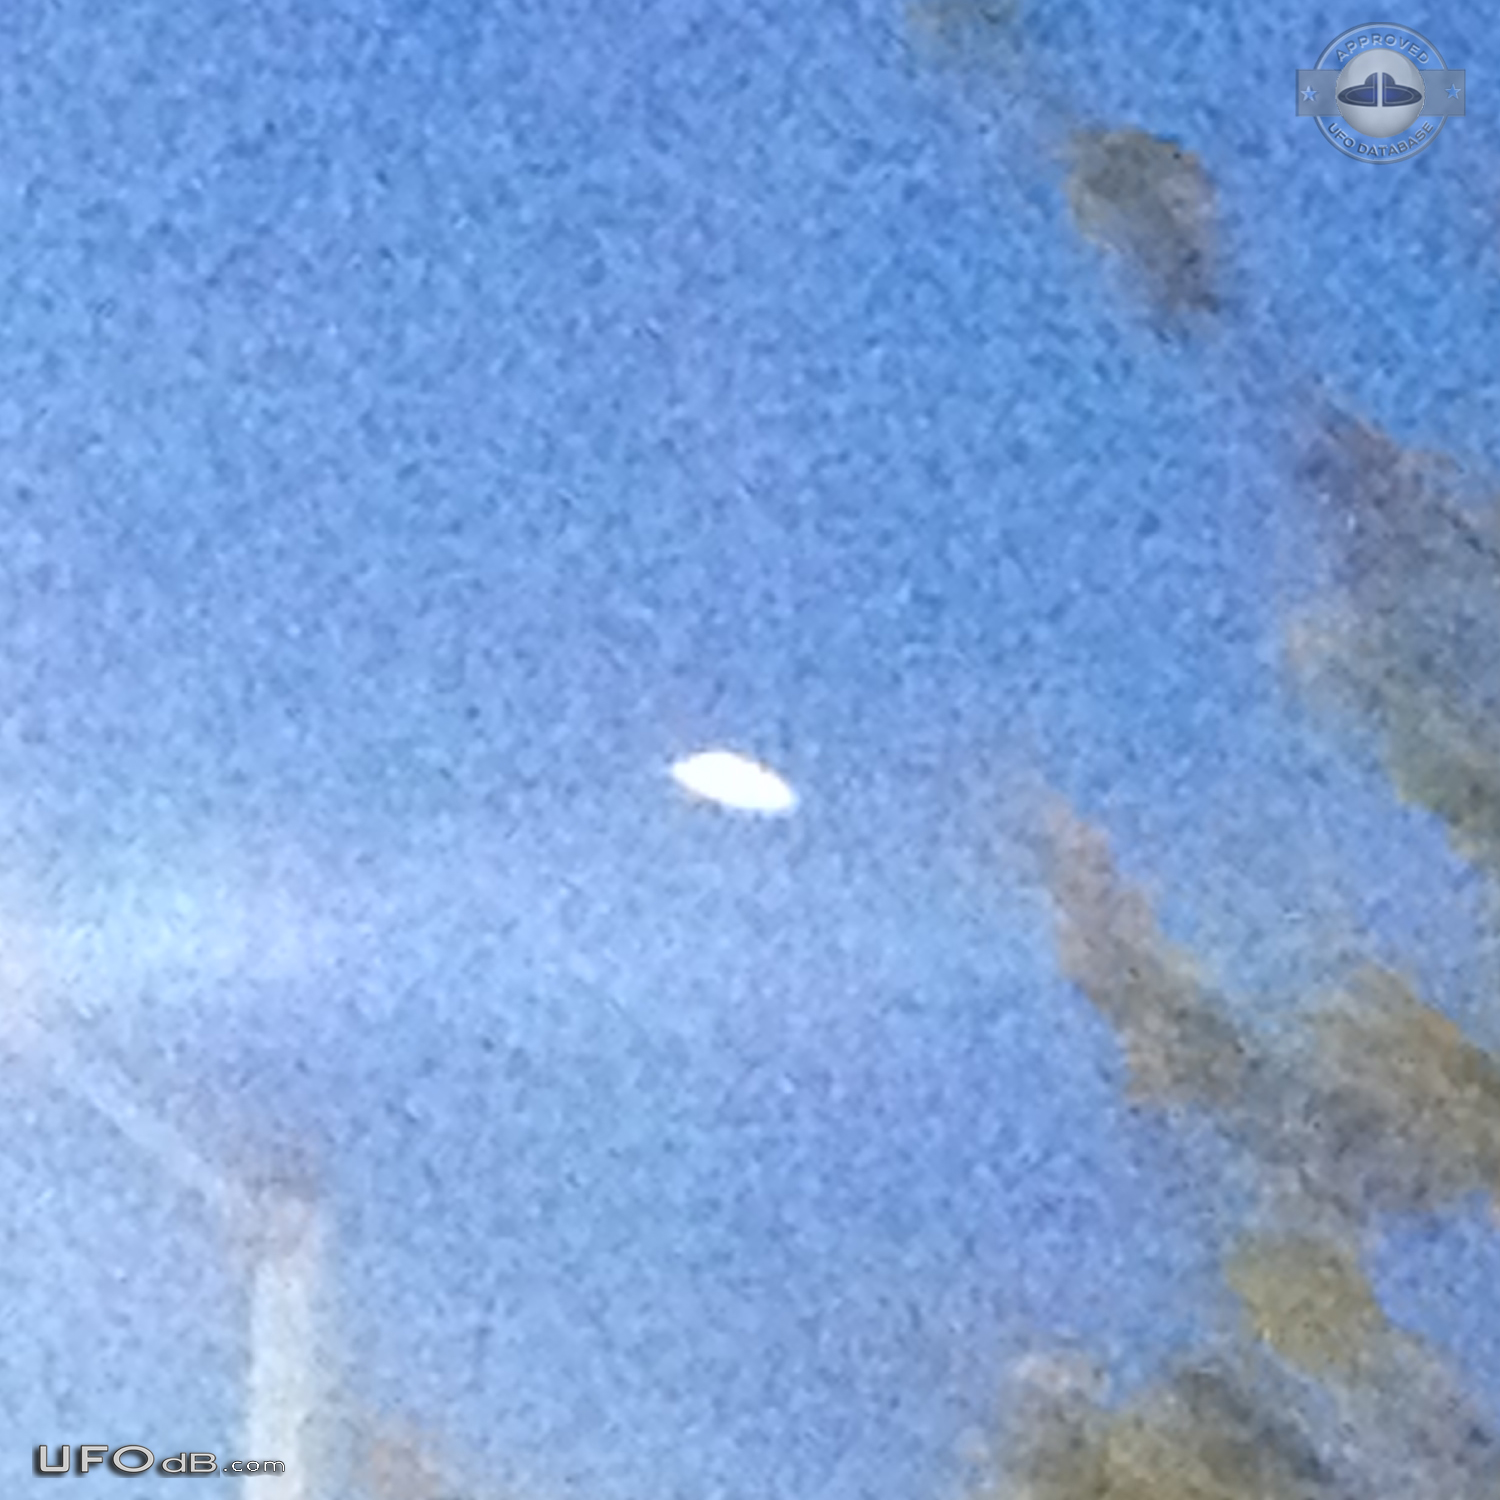 Luminescent dome shaped UFO with red light at its base Los Angeles USA UFO Picture #730-3